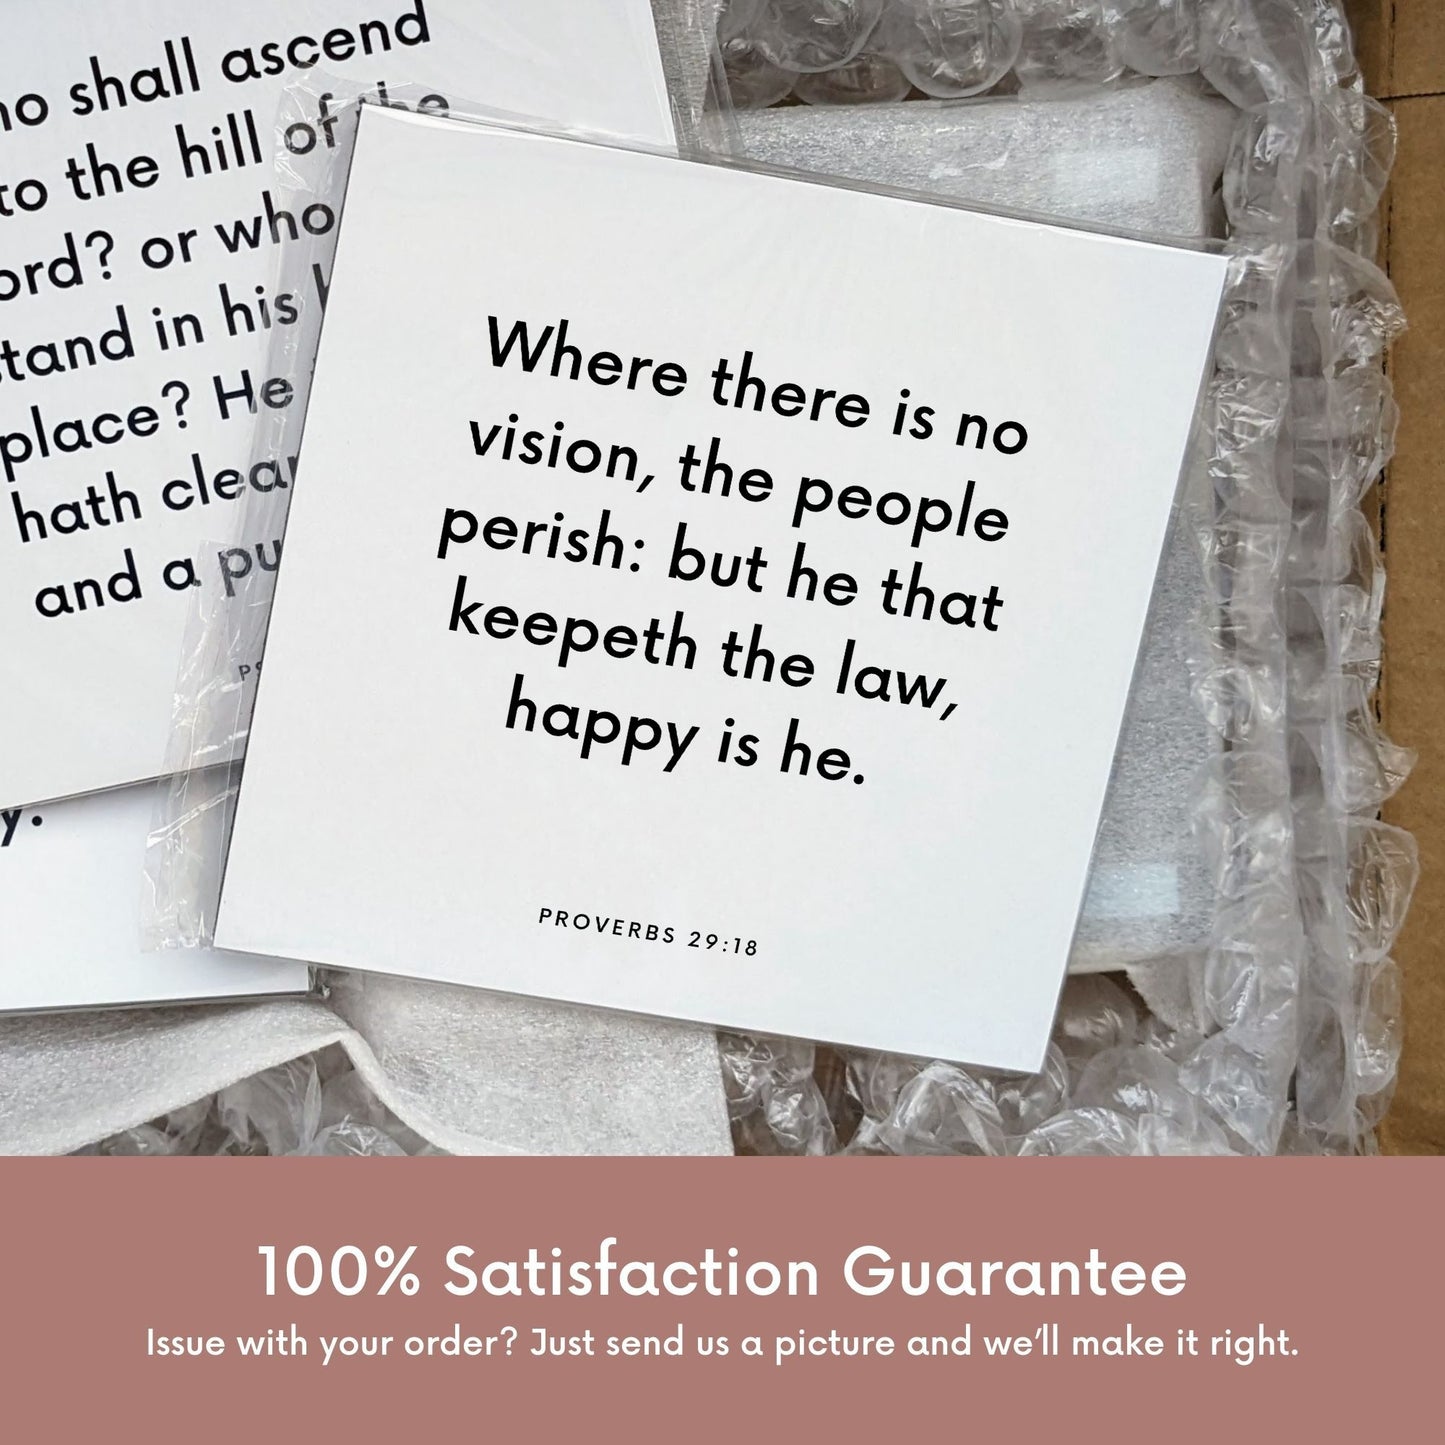 Shipping materials for scripture tile of Proverbs 29:18 - "Where there is no vision, the people perish"